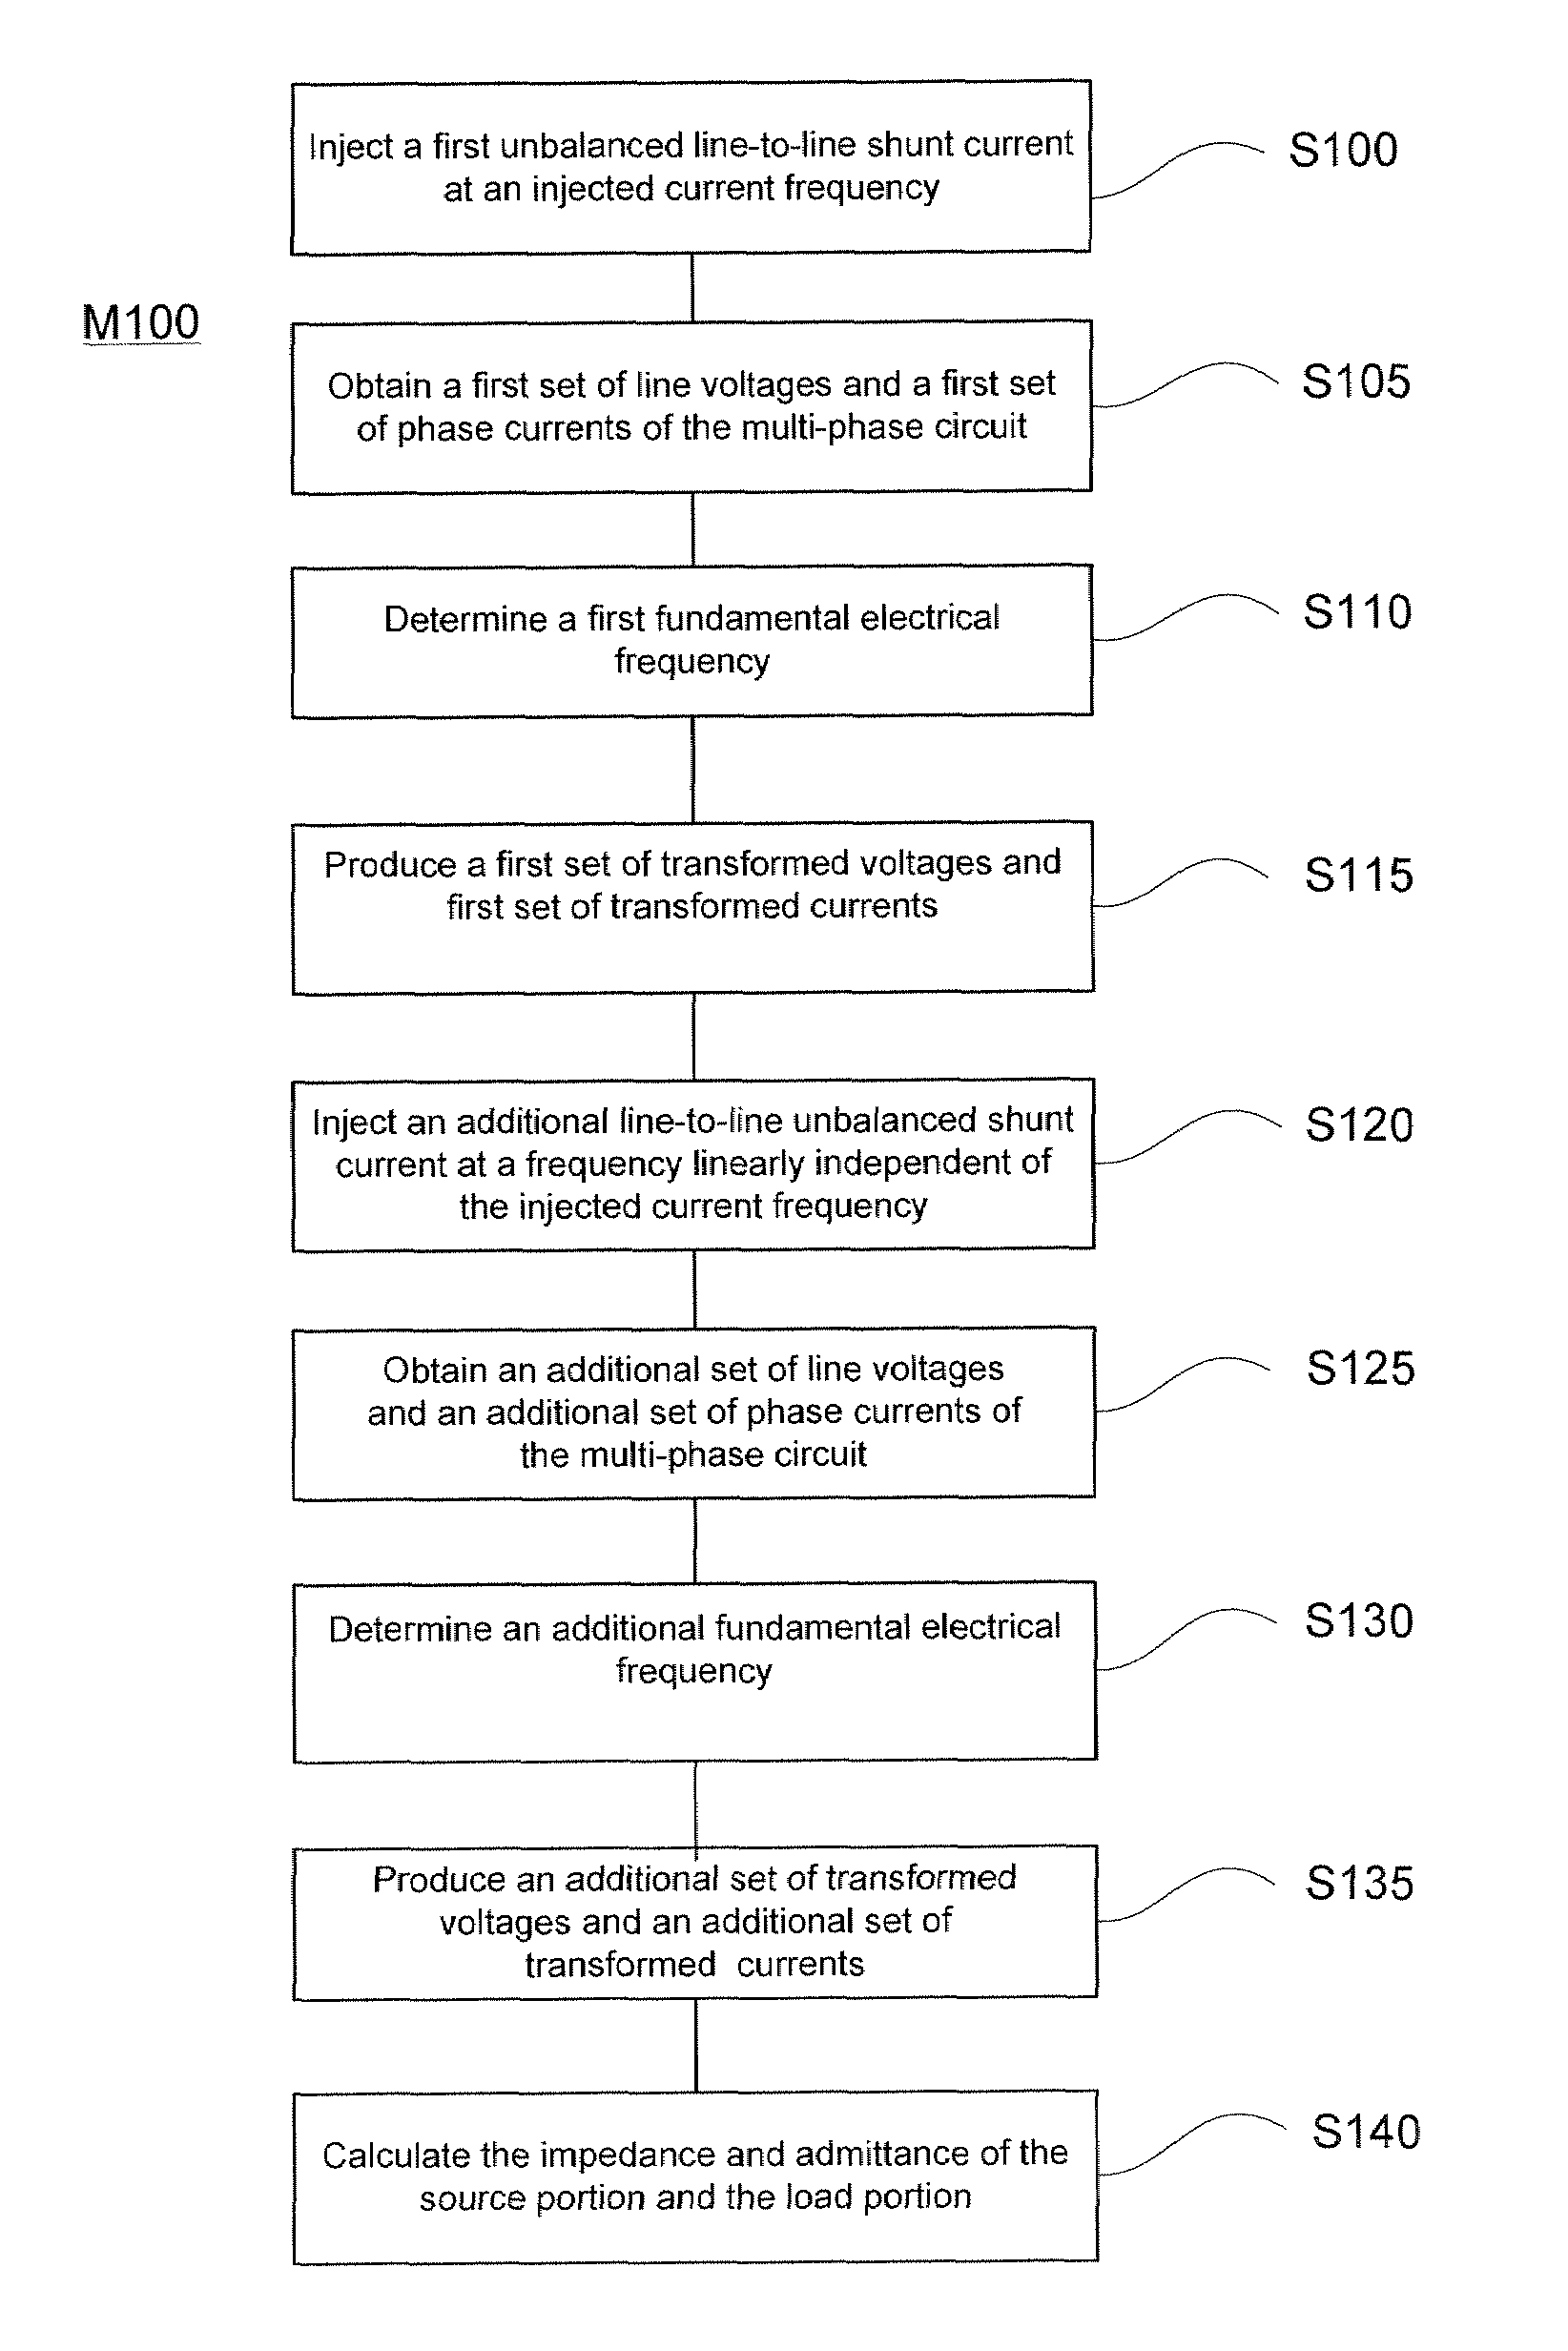 Impedance Measurement Using Line-to-Line Current Injection